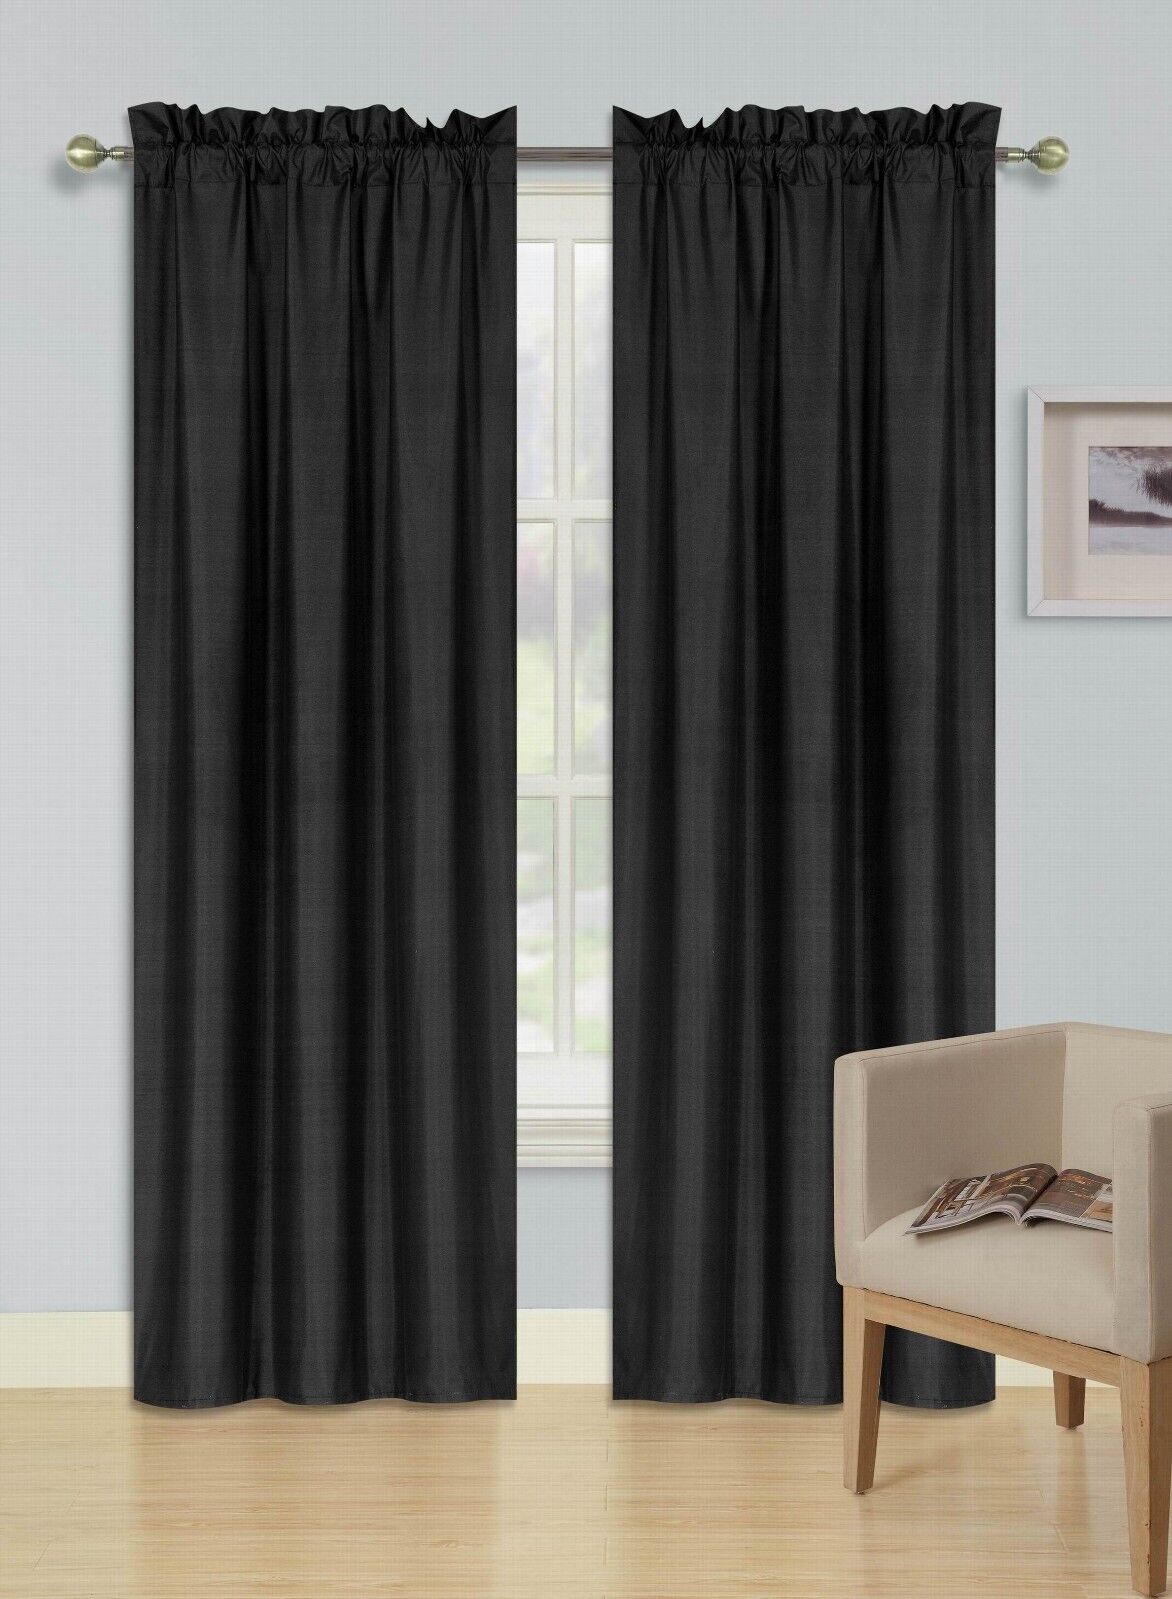 2pc set window curtain panel 100% privacy 65% blackout lined bedroom drapery R64